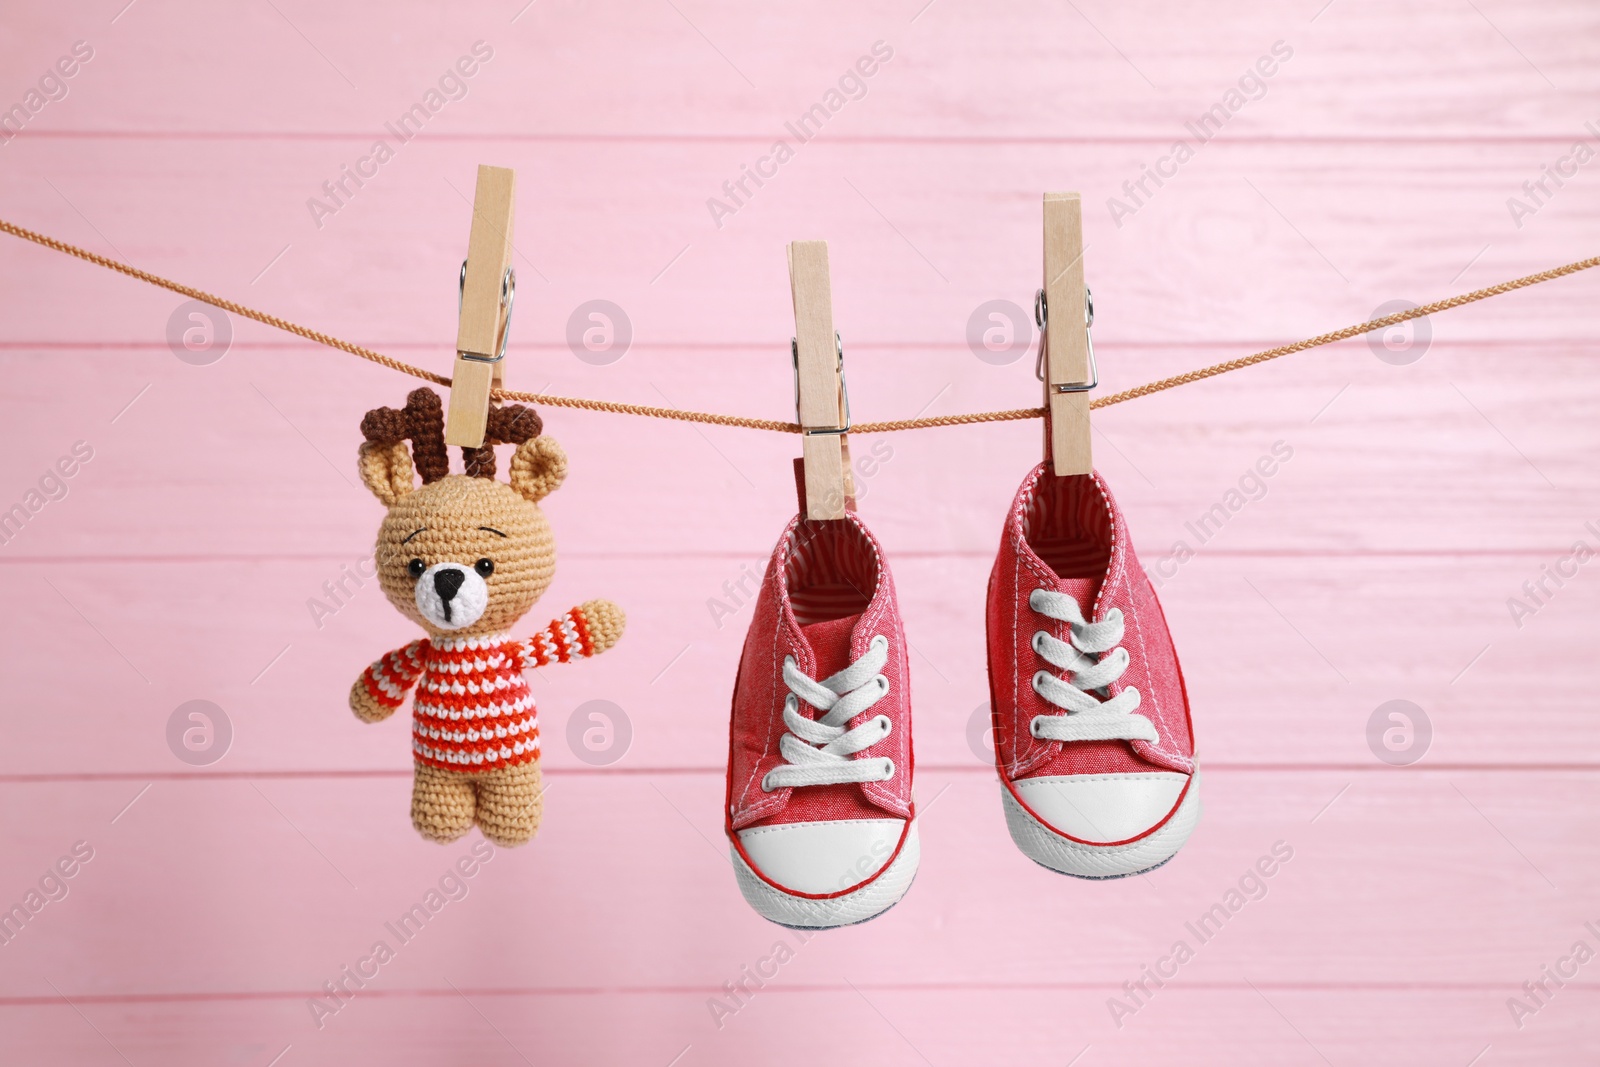 Photo of Cute baby sneakers and crochet toy drying on washing line against pink wooden wall